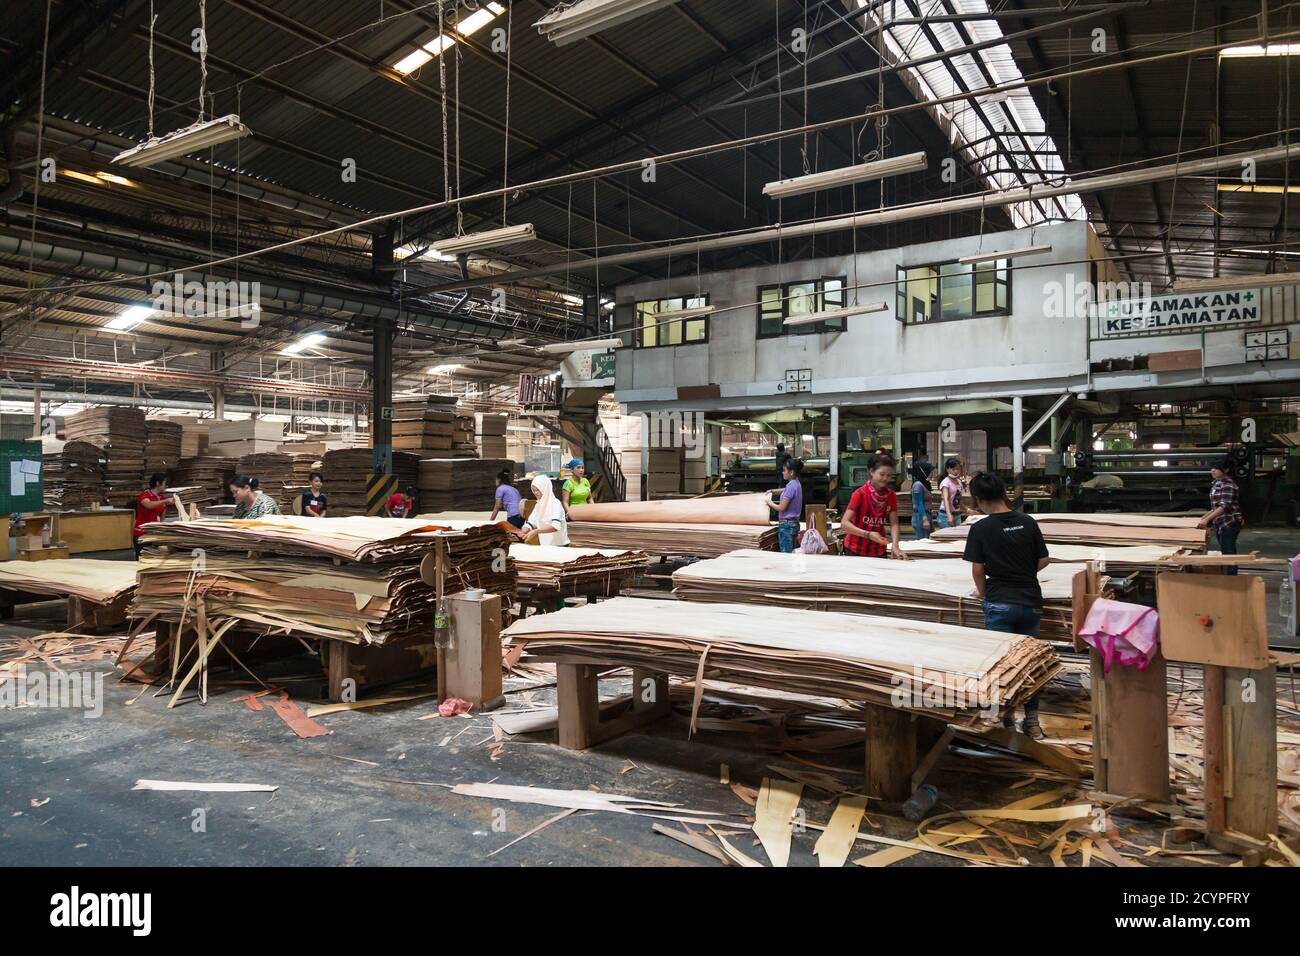 https://c8.alamy.com/comp/2CYPFRY/repairing-sorting-and-stacking-of-sheets-of-veneers-after-leaving-the-chin-hsiang-continuous-dryer-in-a-plywood-factory-in-sandakan-malaysia-2CYPFRY.jpg